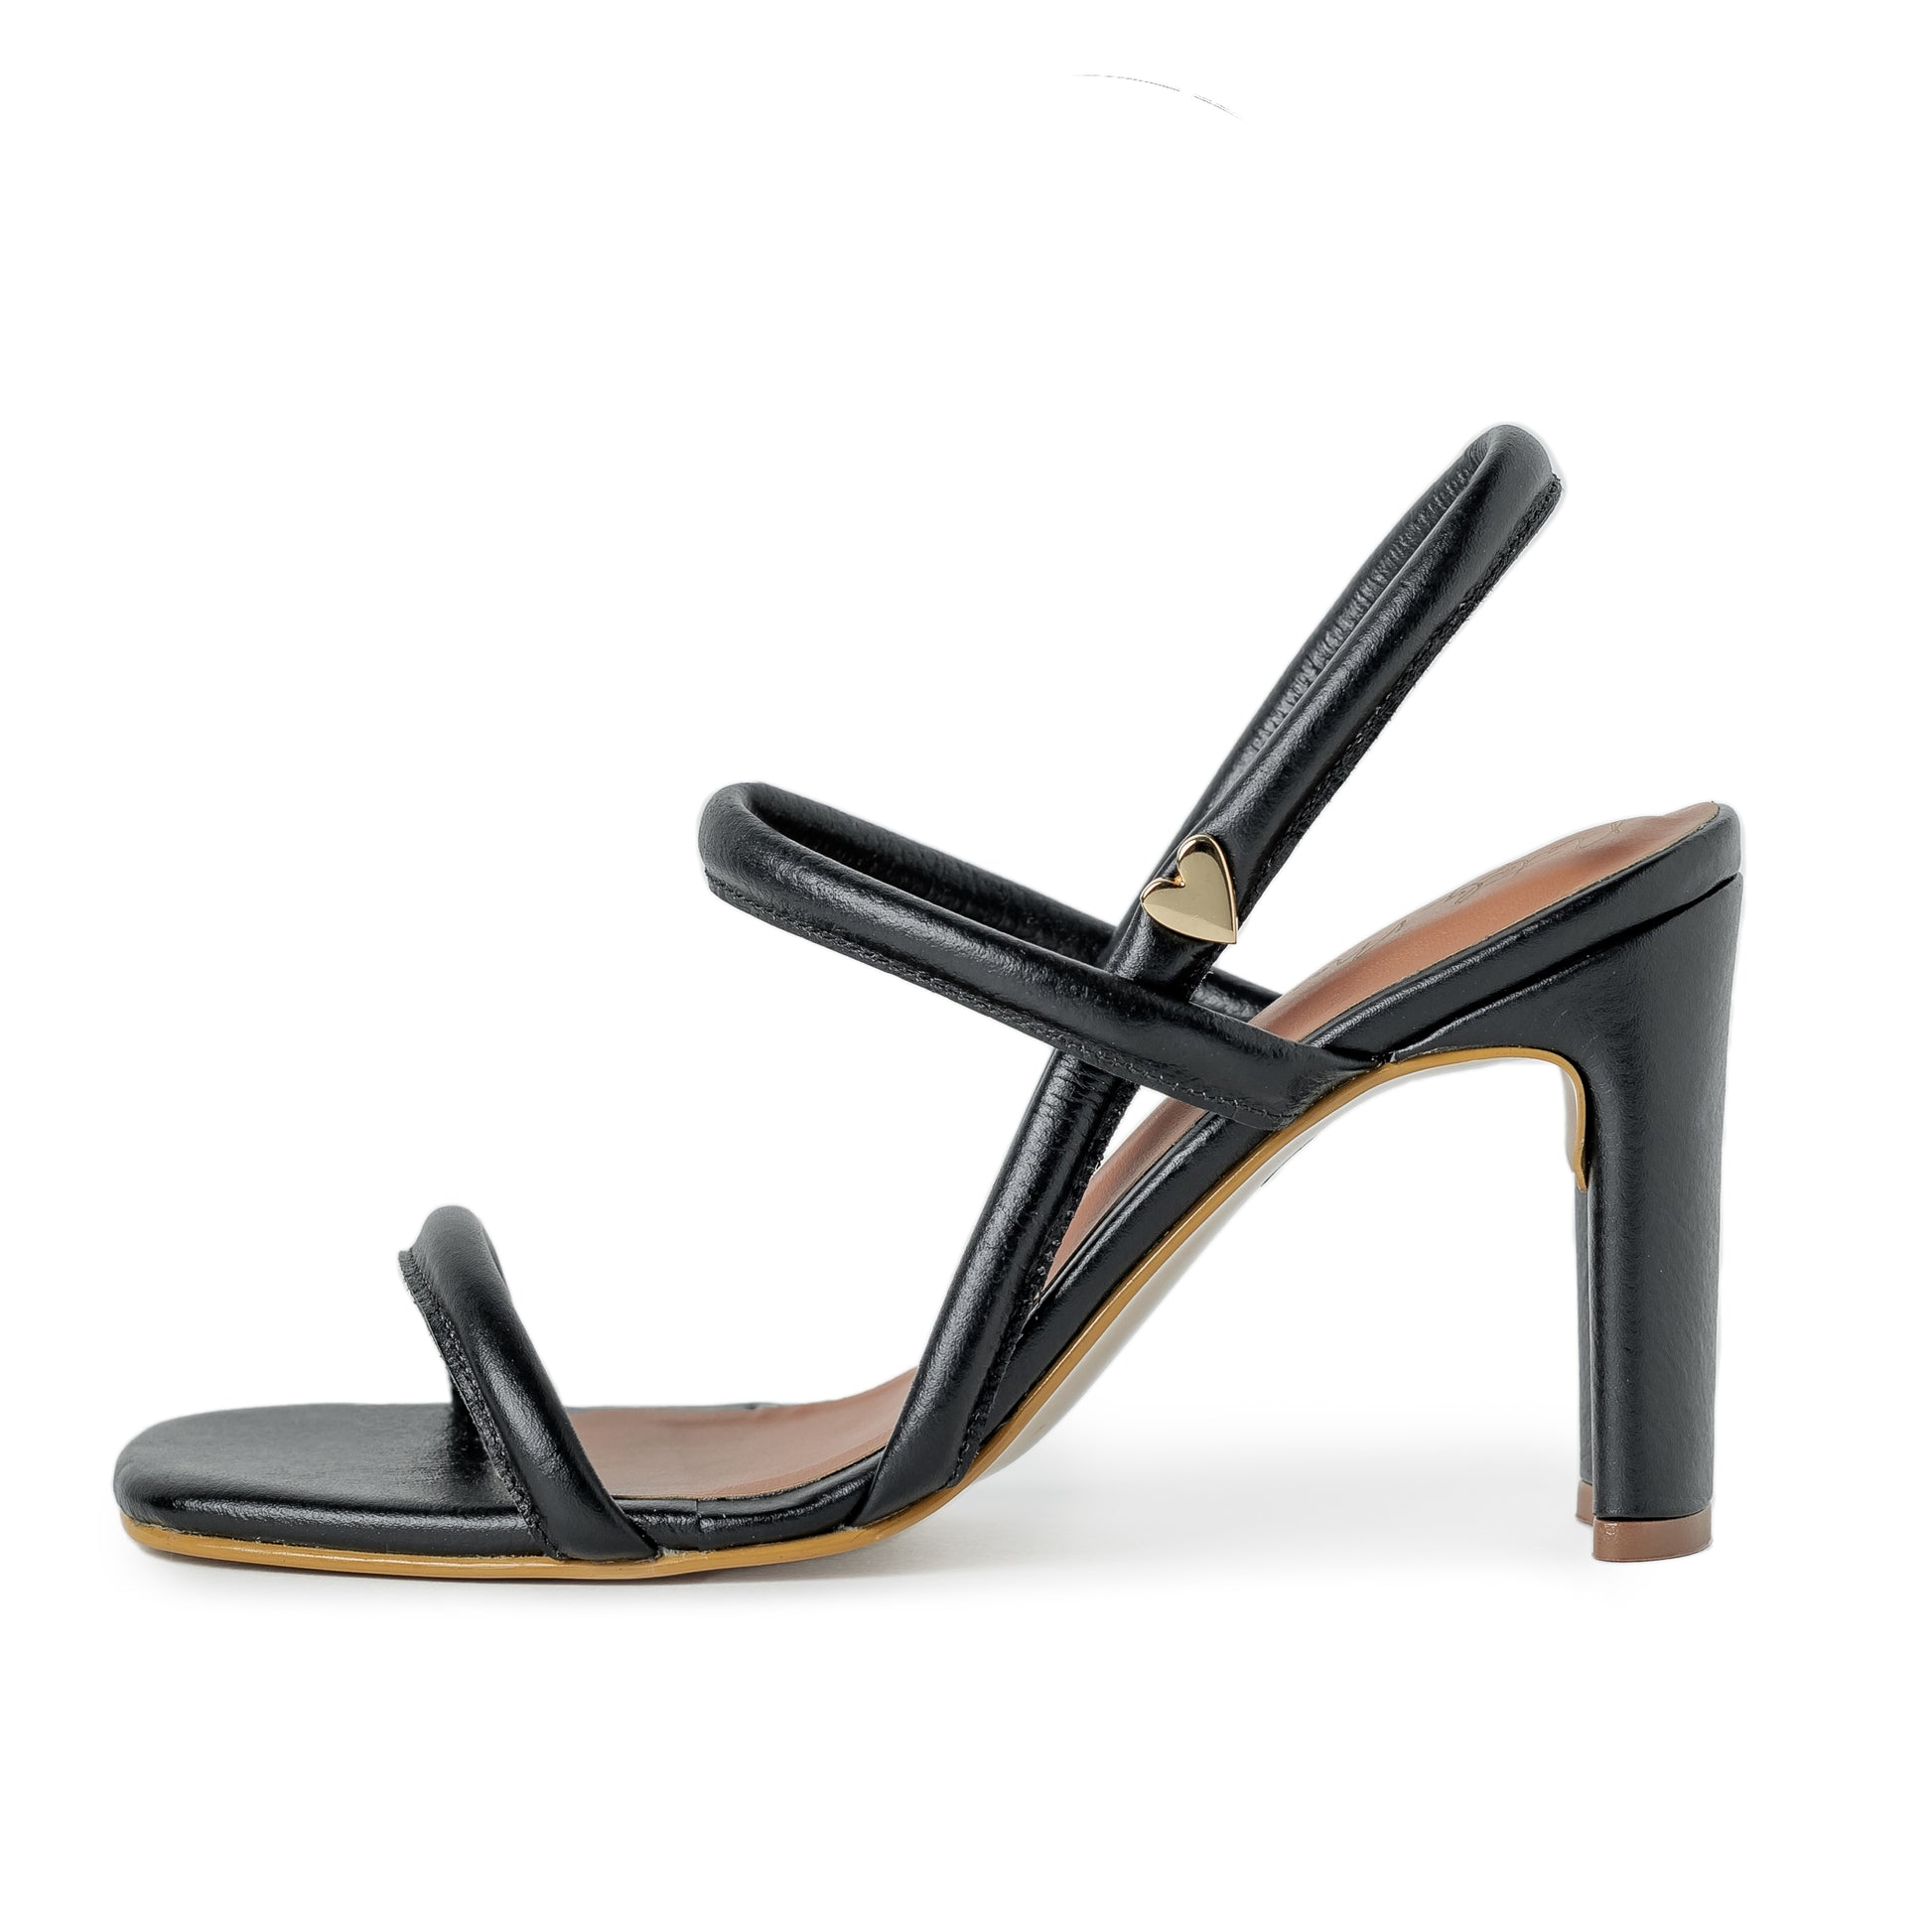 Maggie Sandals Black by Nataly Mendez. Genuine Leather on the upper. Insole made of leather. Pronounced arch. Handmade 4 inch heel height 0.5 inch platform